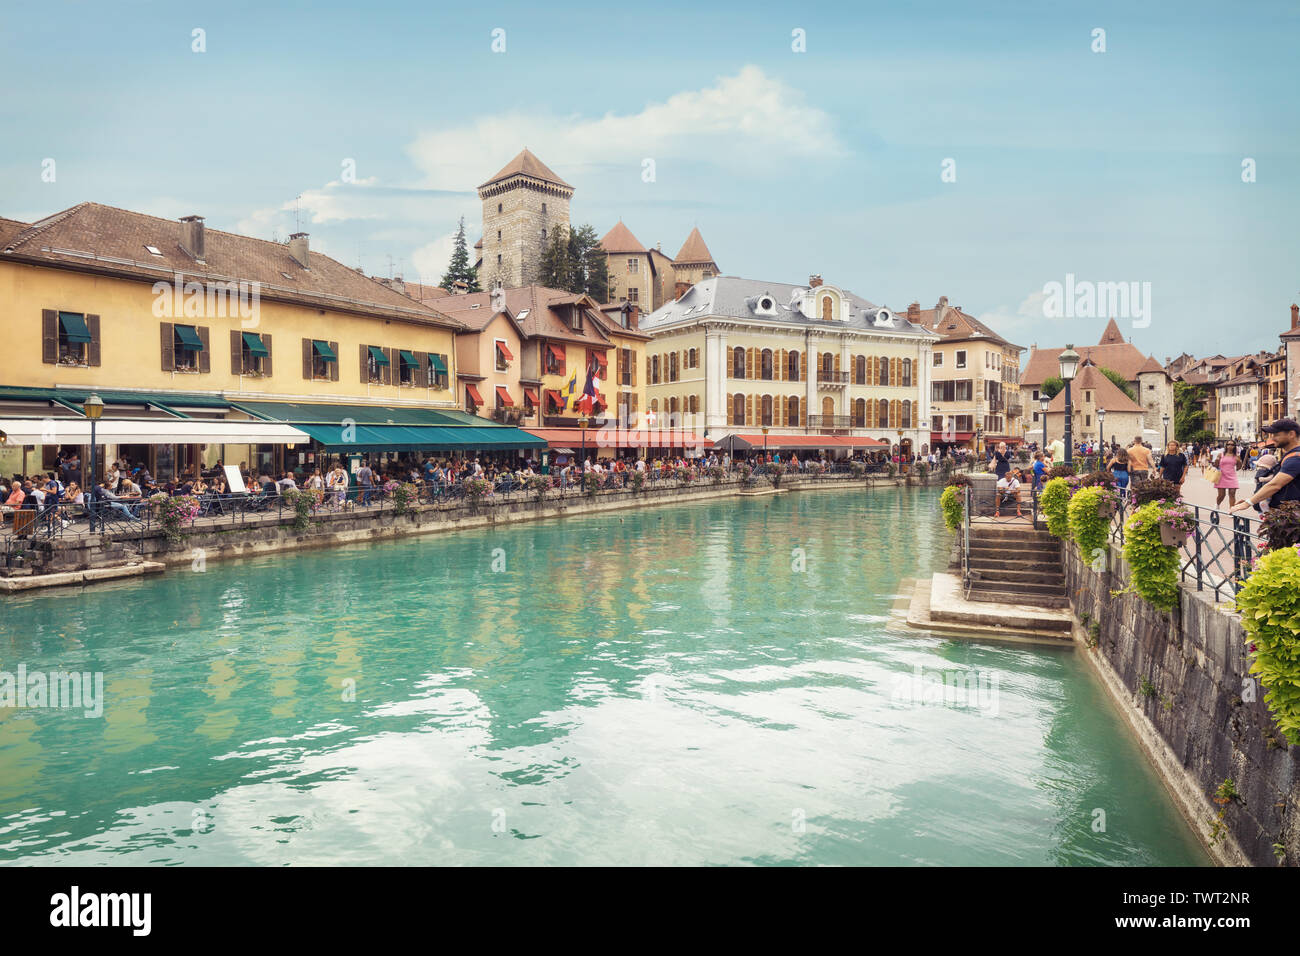 Tourists enjoying view of Annecy Old town, France Stock Photo